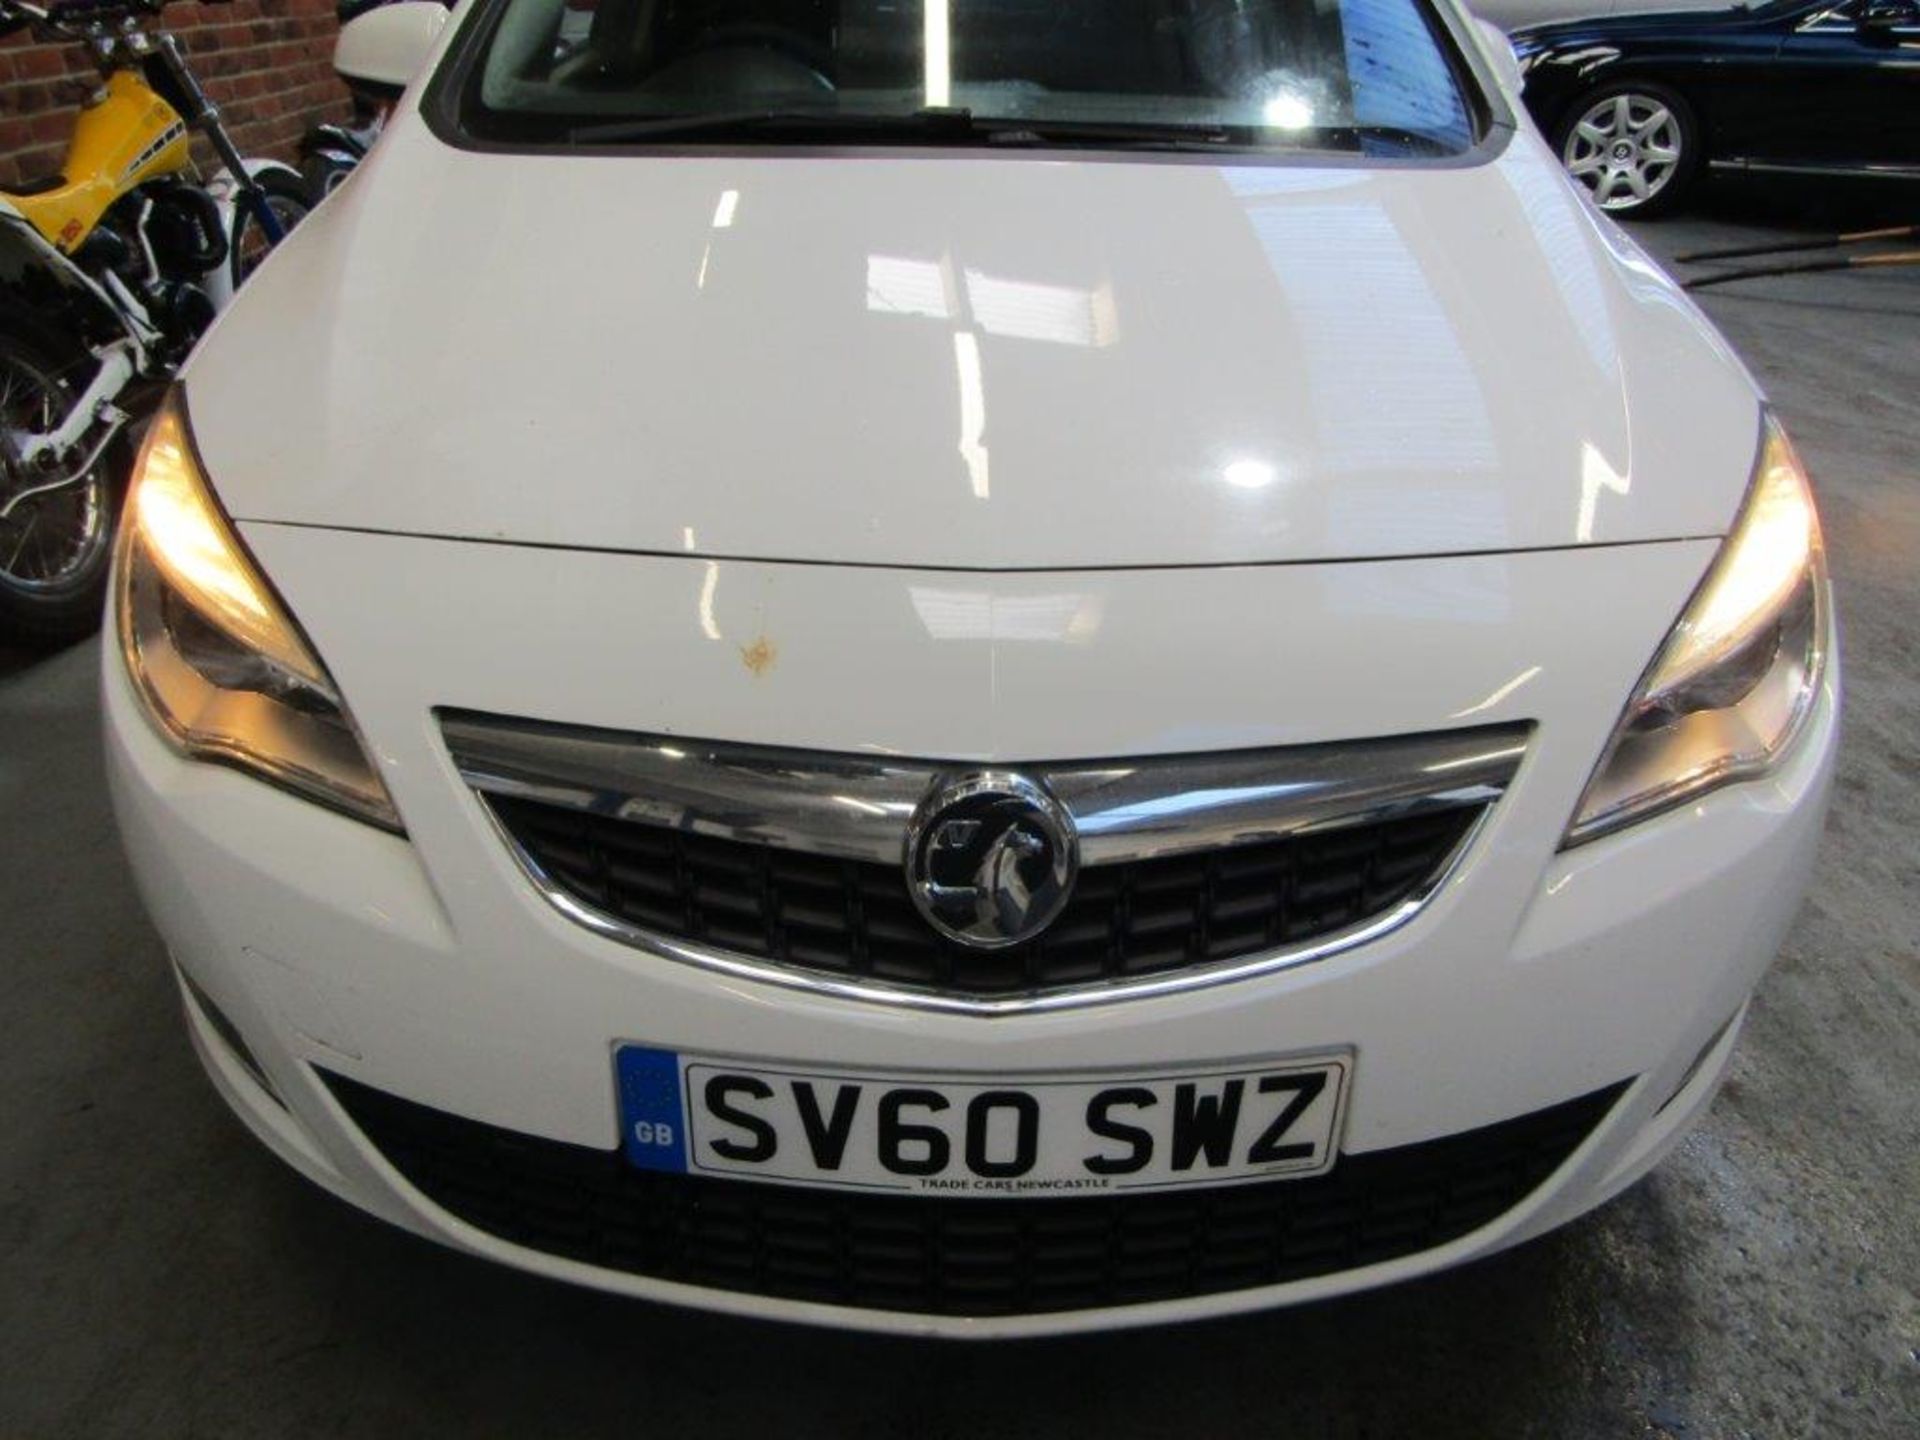 60 10 Vauxhall Astra Exclusiv 98 - Image 5 of 20